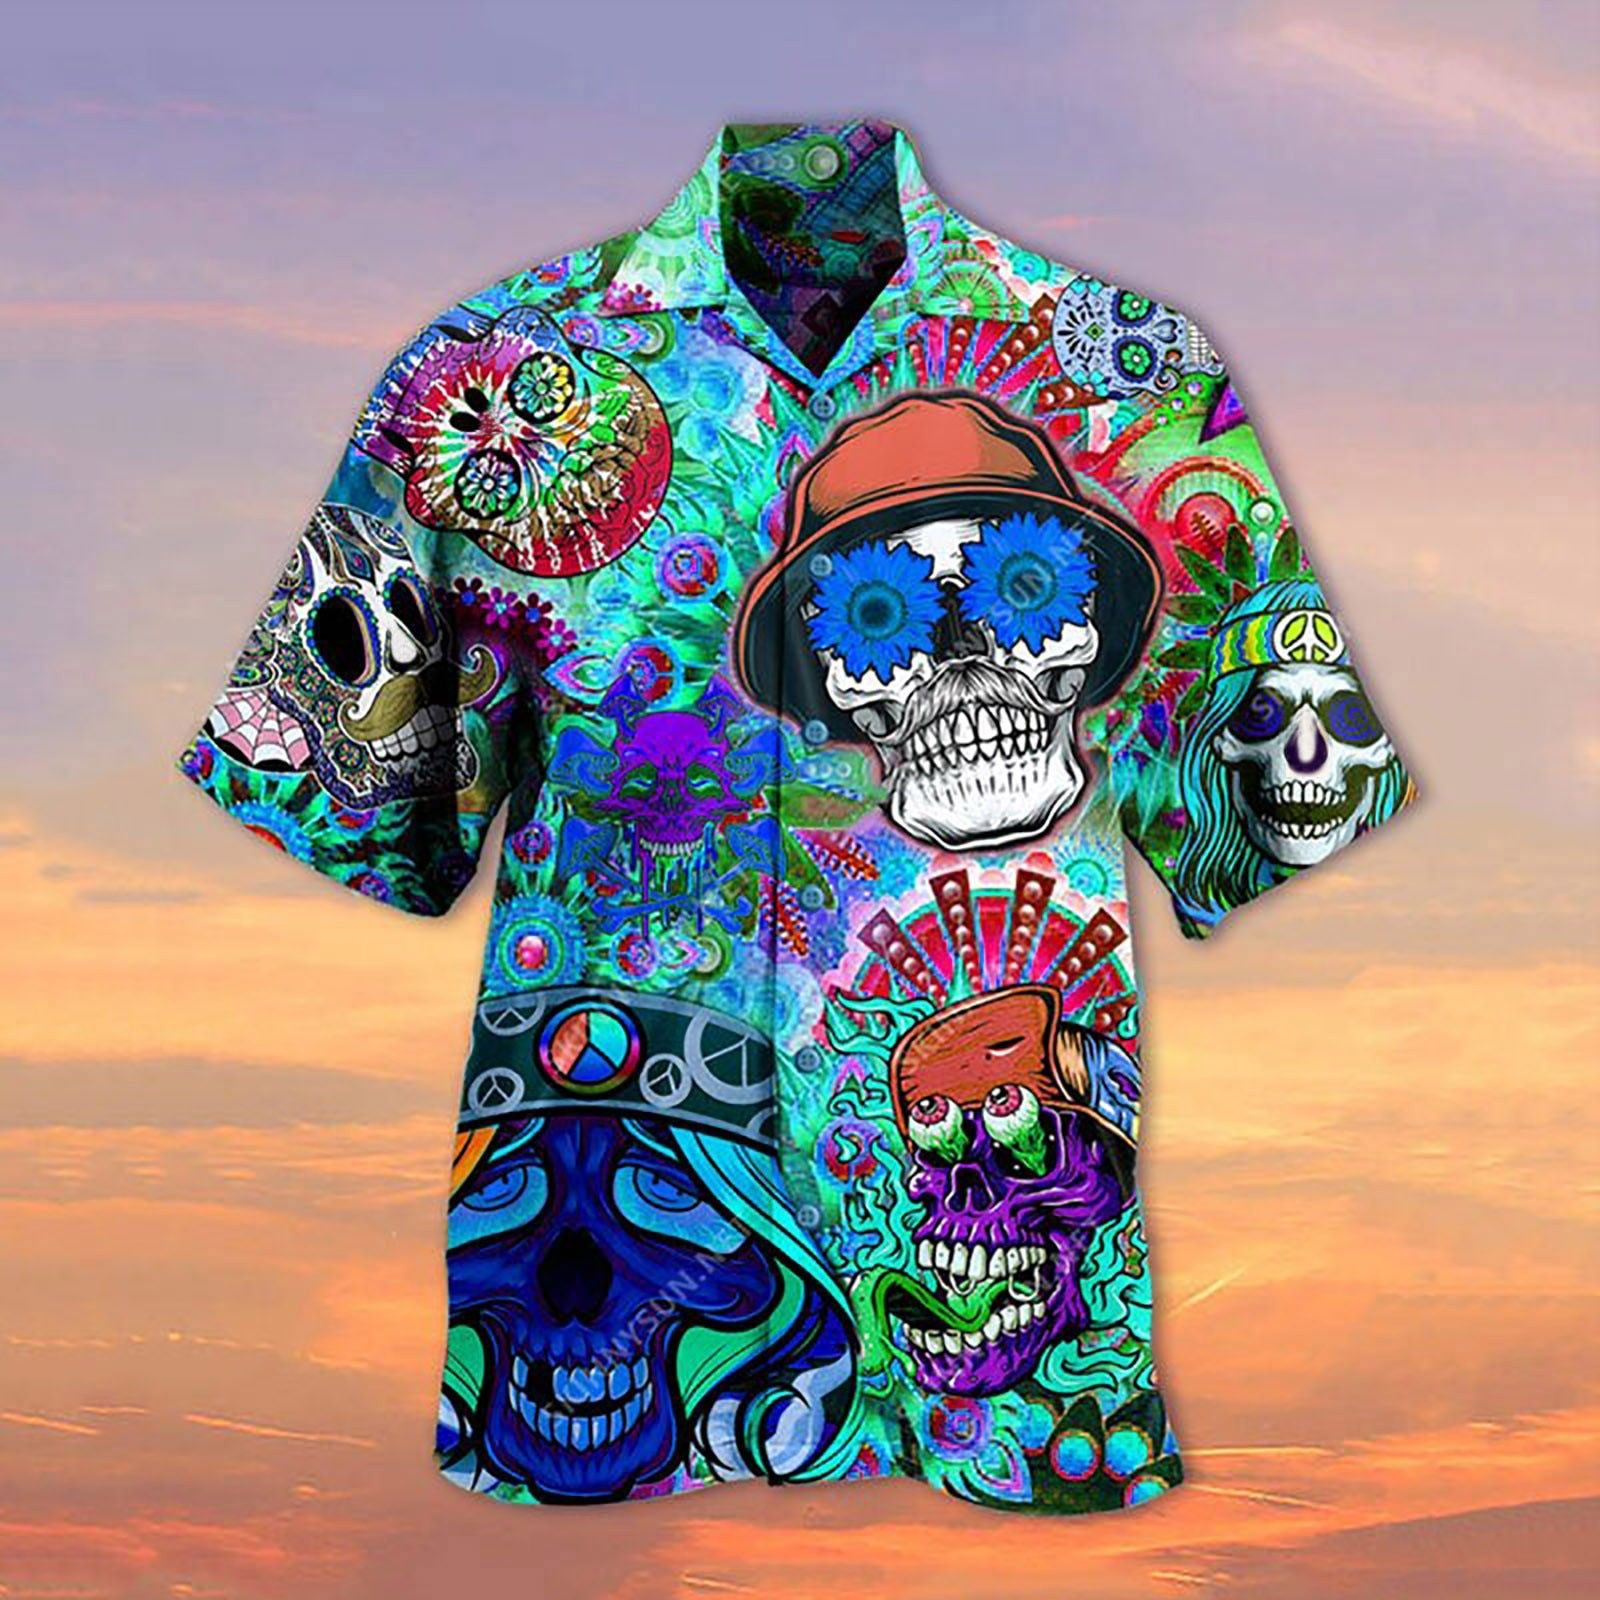 Skull Loose   Blue Awesome Design Unisex Hawaiian Shirt For Men And Women Dhc17064110